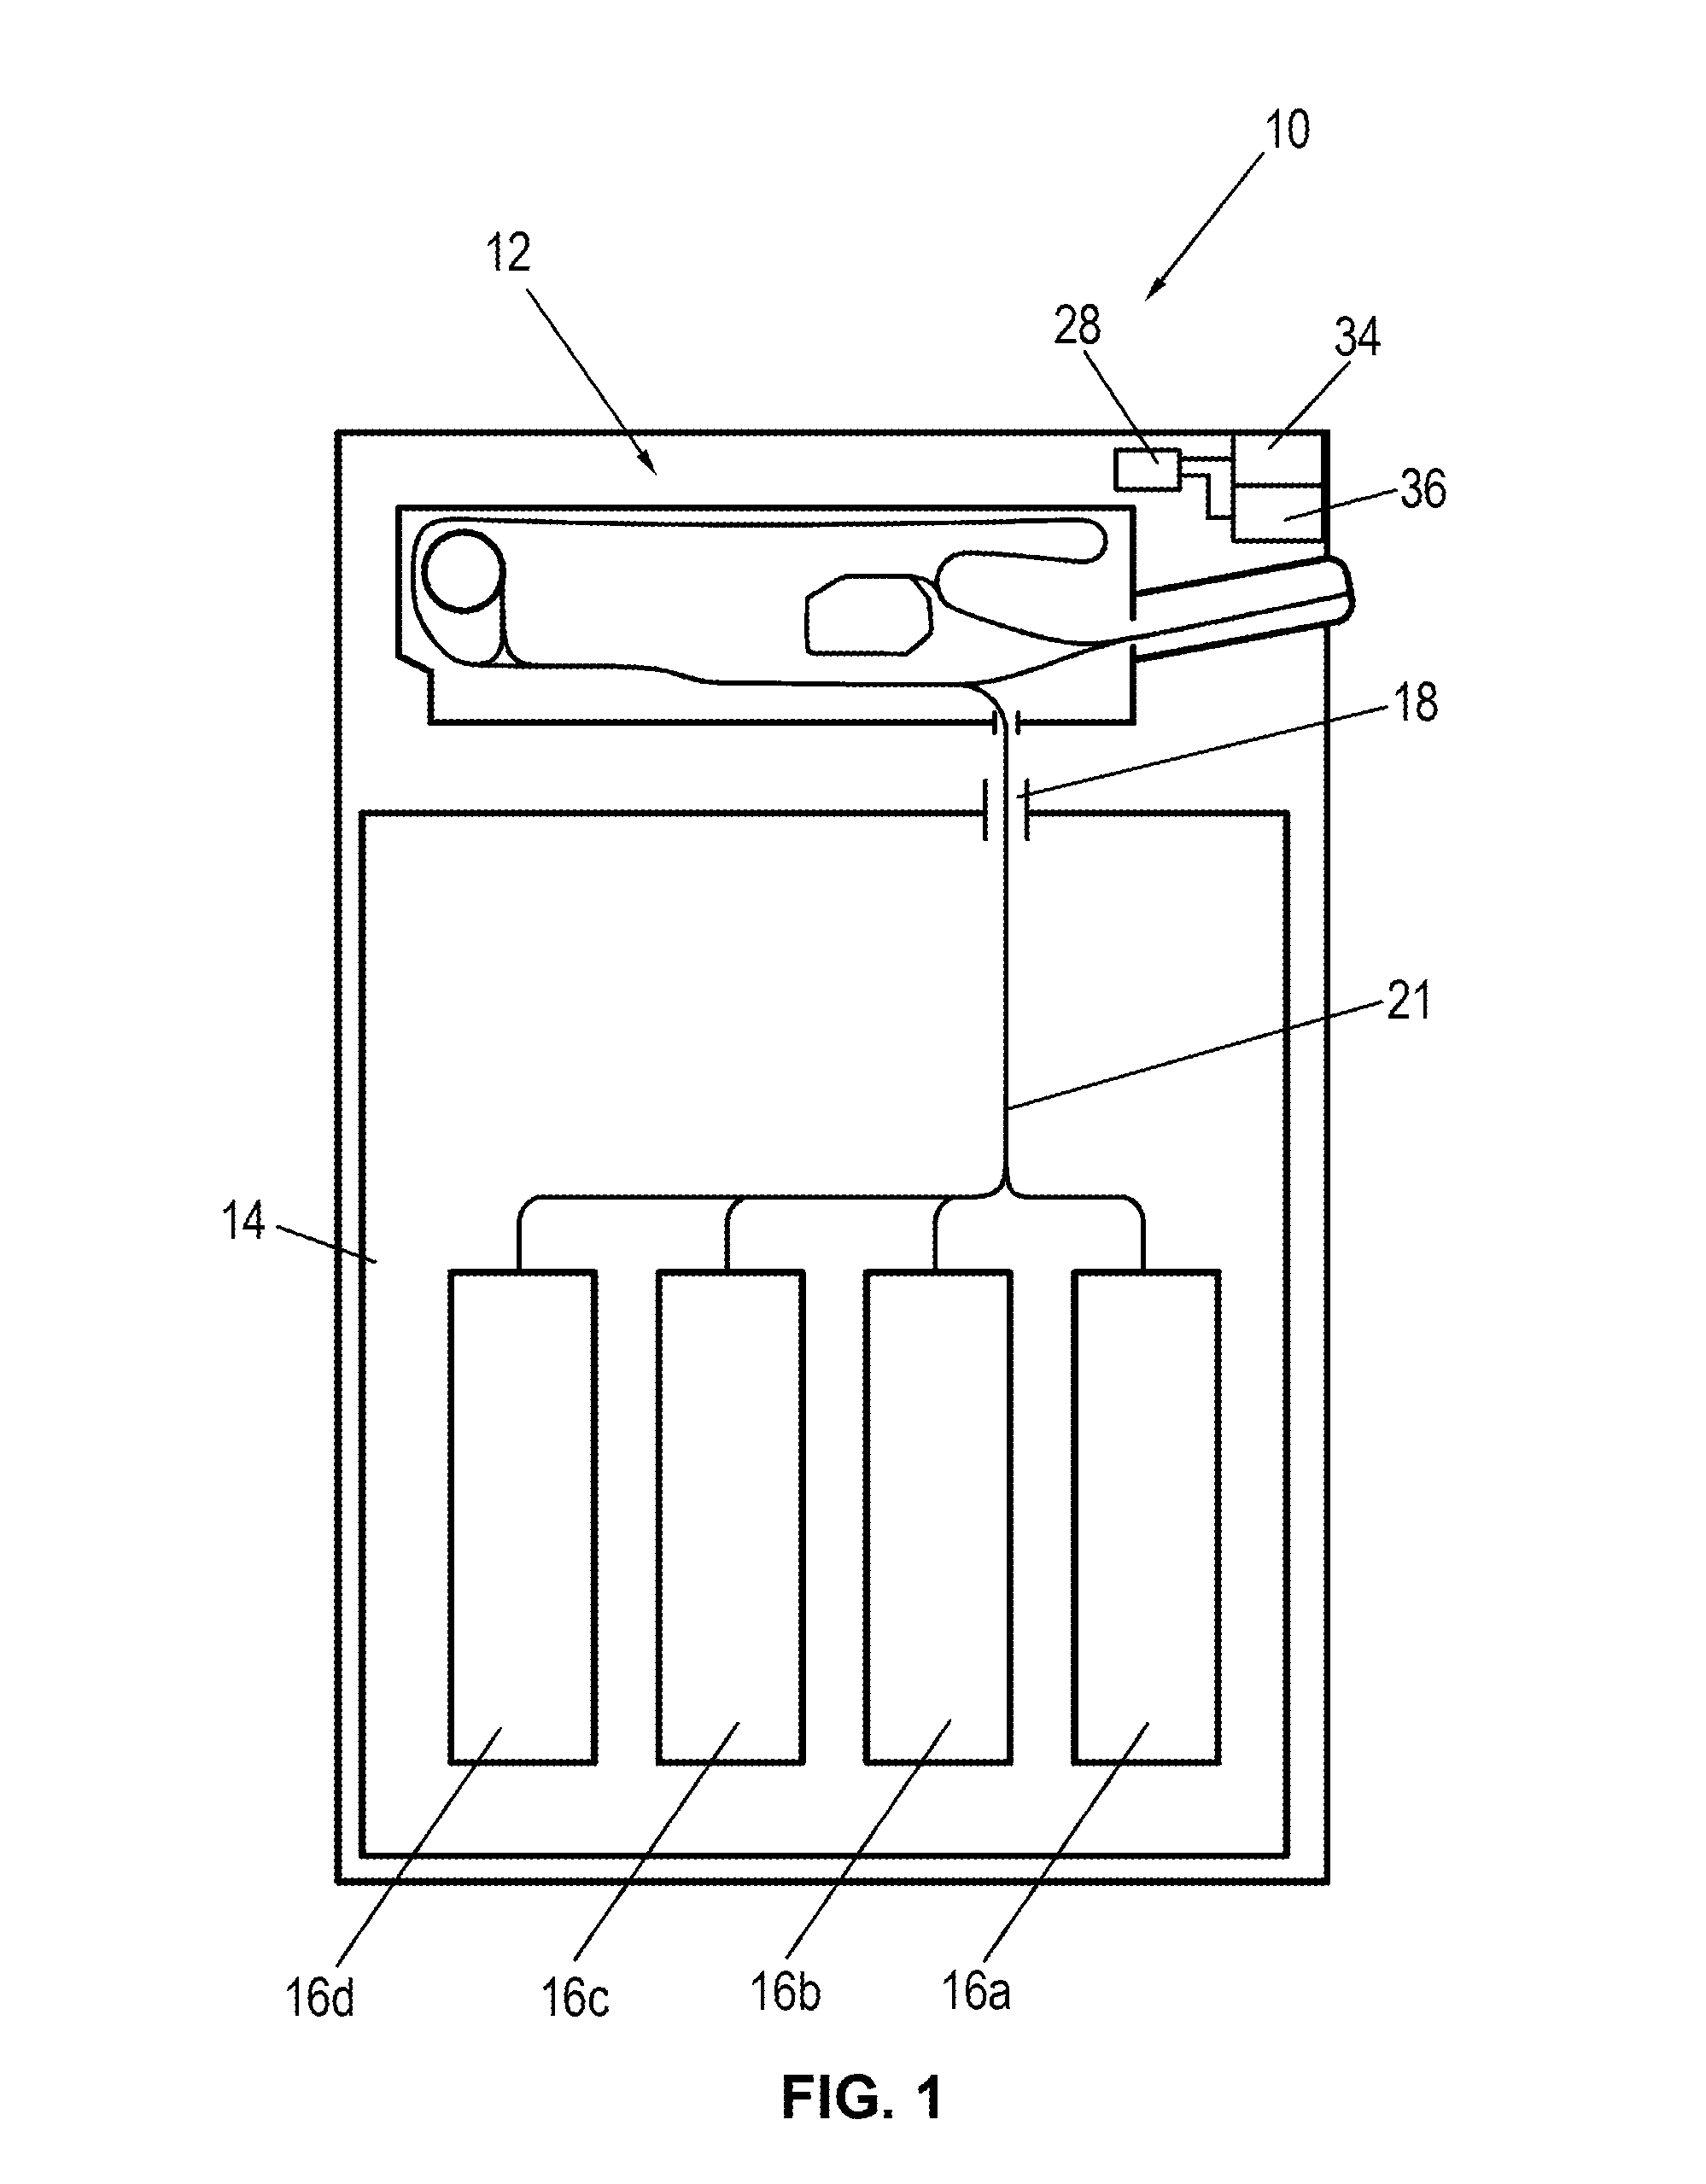 Device for handling valuable documents having an aligning unit for aligning banknotes and checks